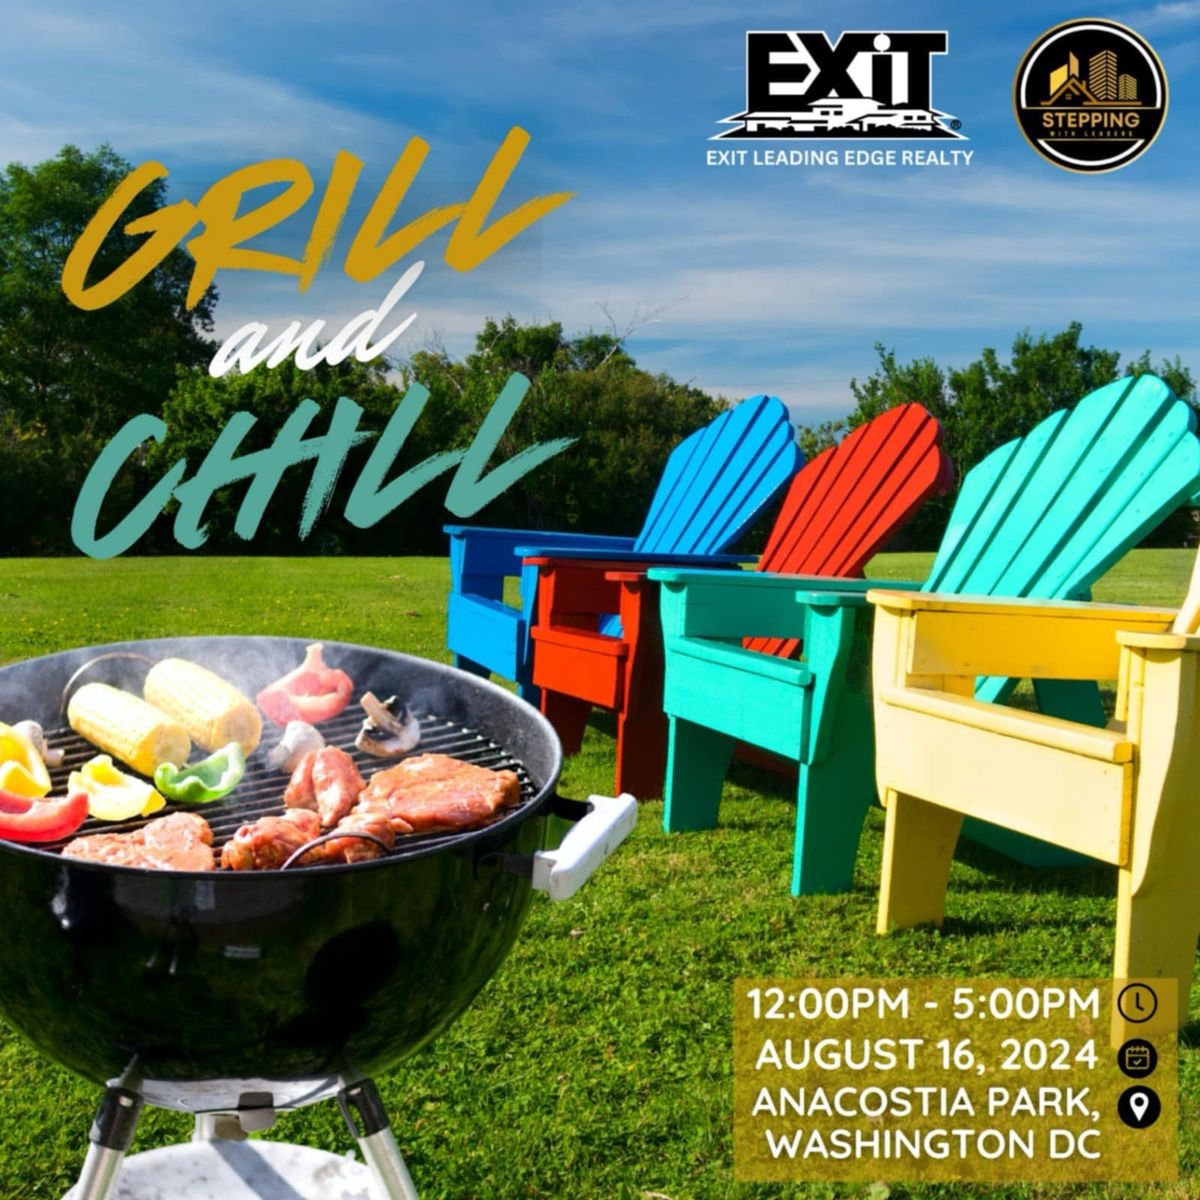 Grill and Chill